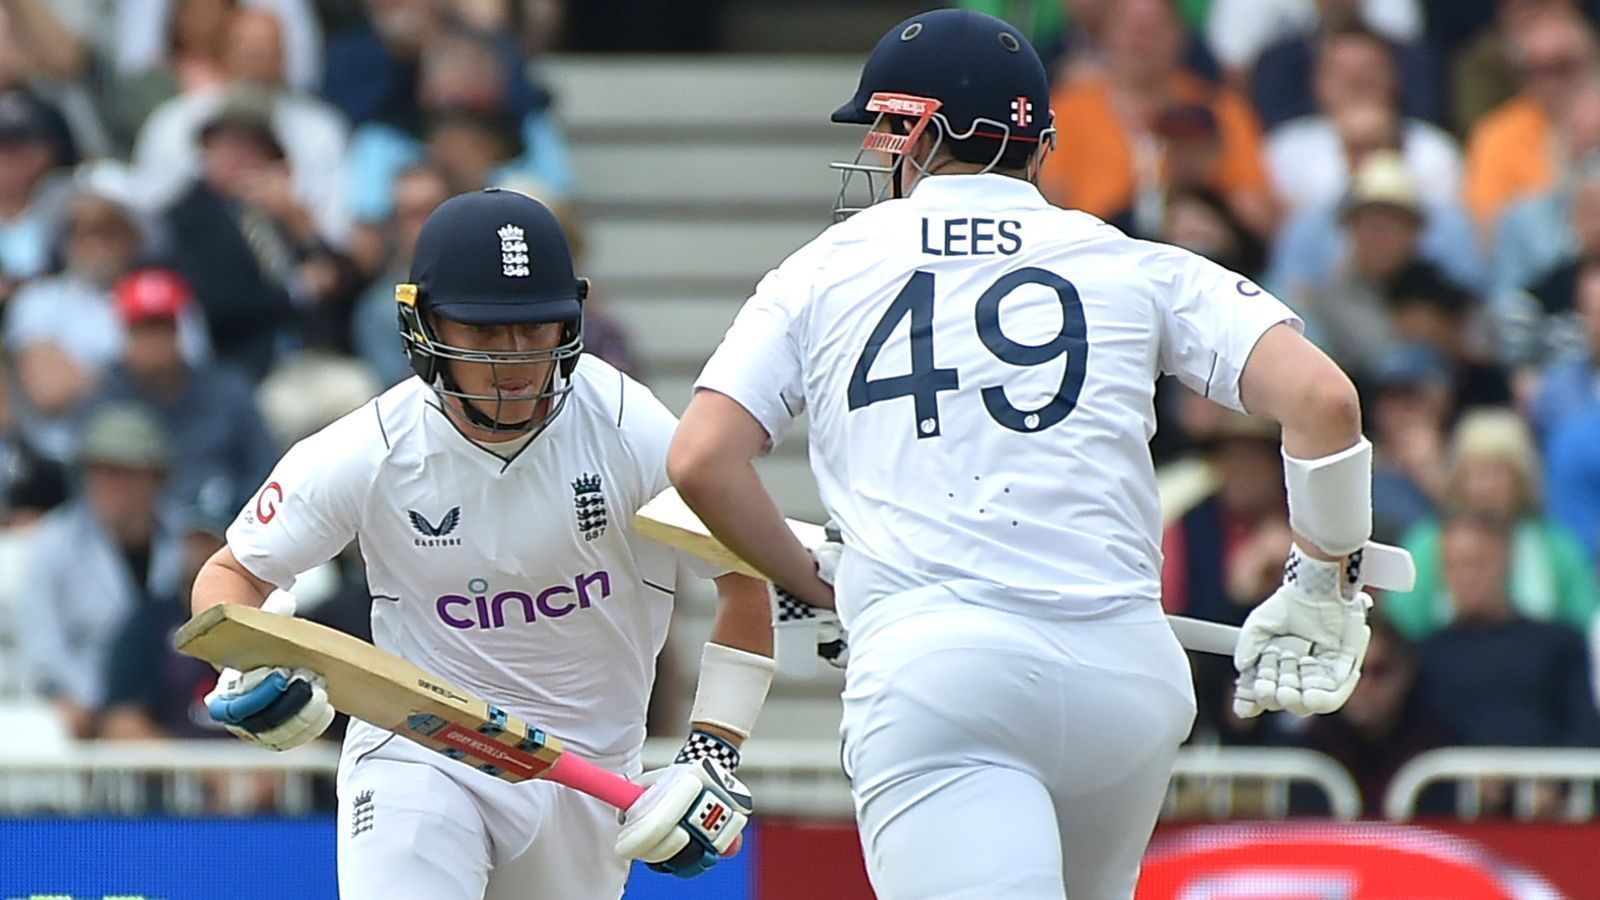 Alex Lees scored his maiden fifty for England